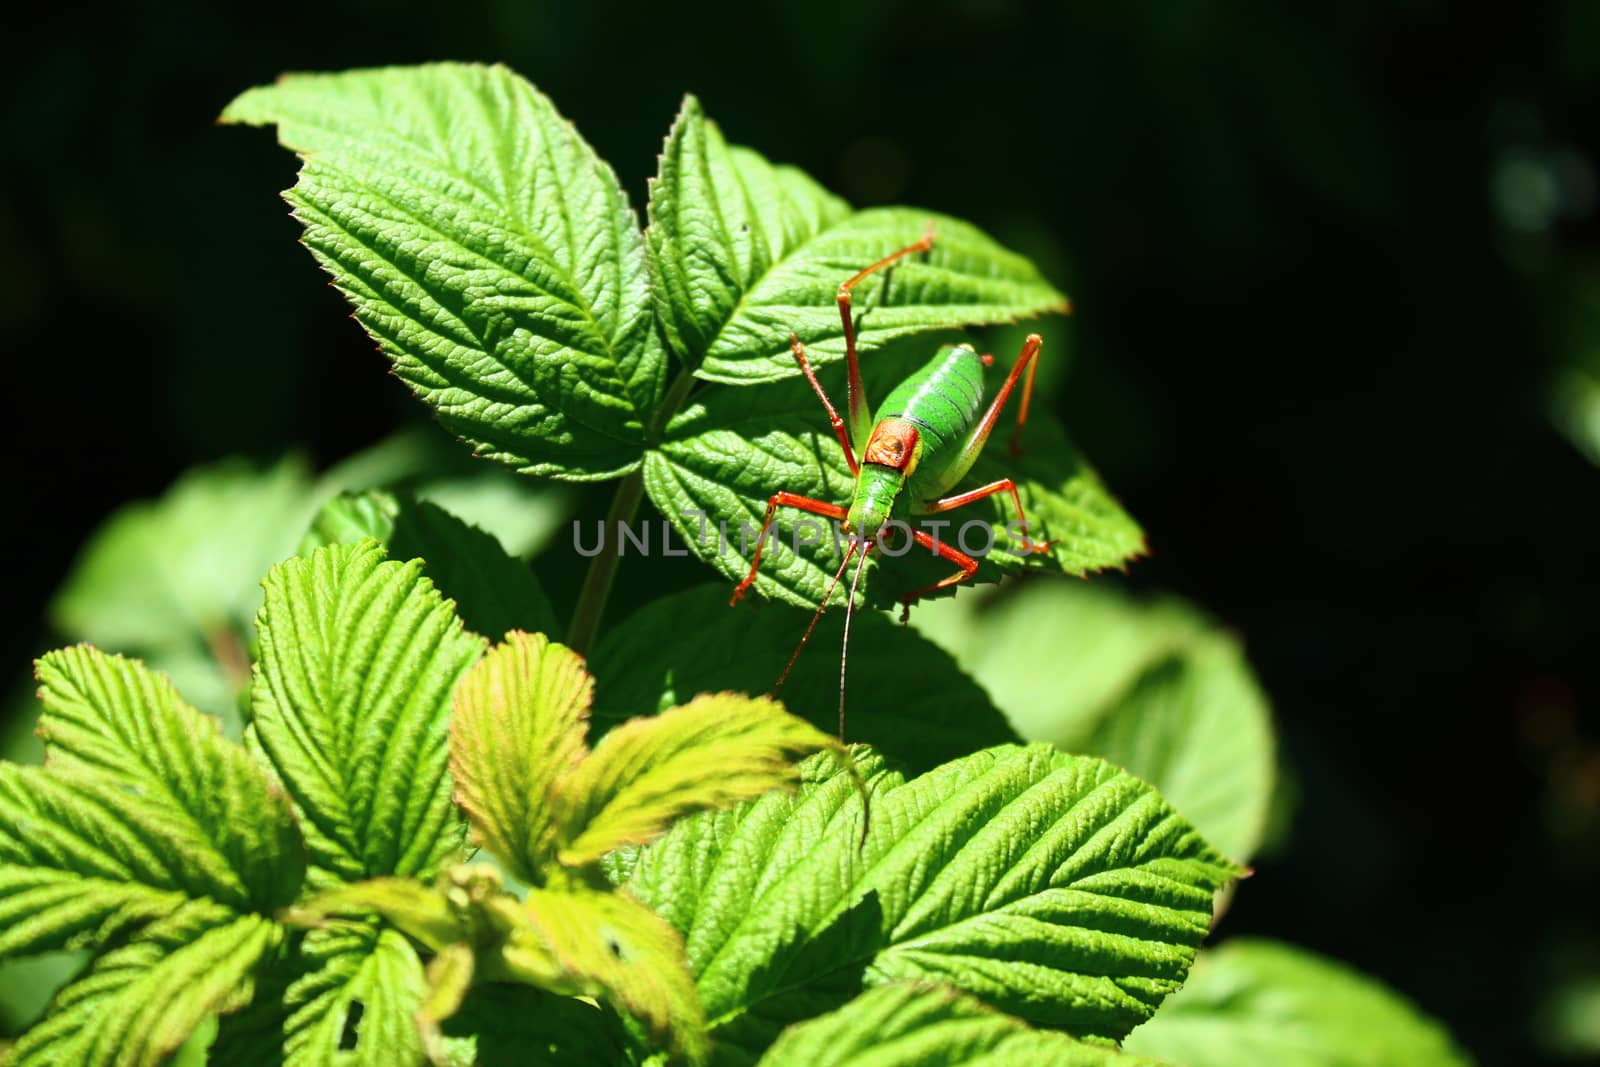 The picture shows a grasshopper on a raspberry leaf.